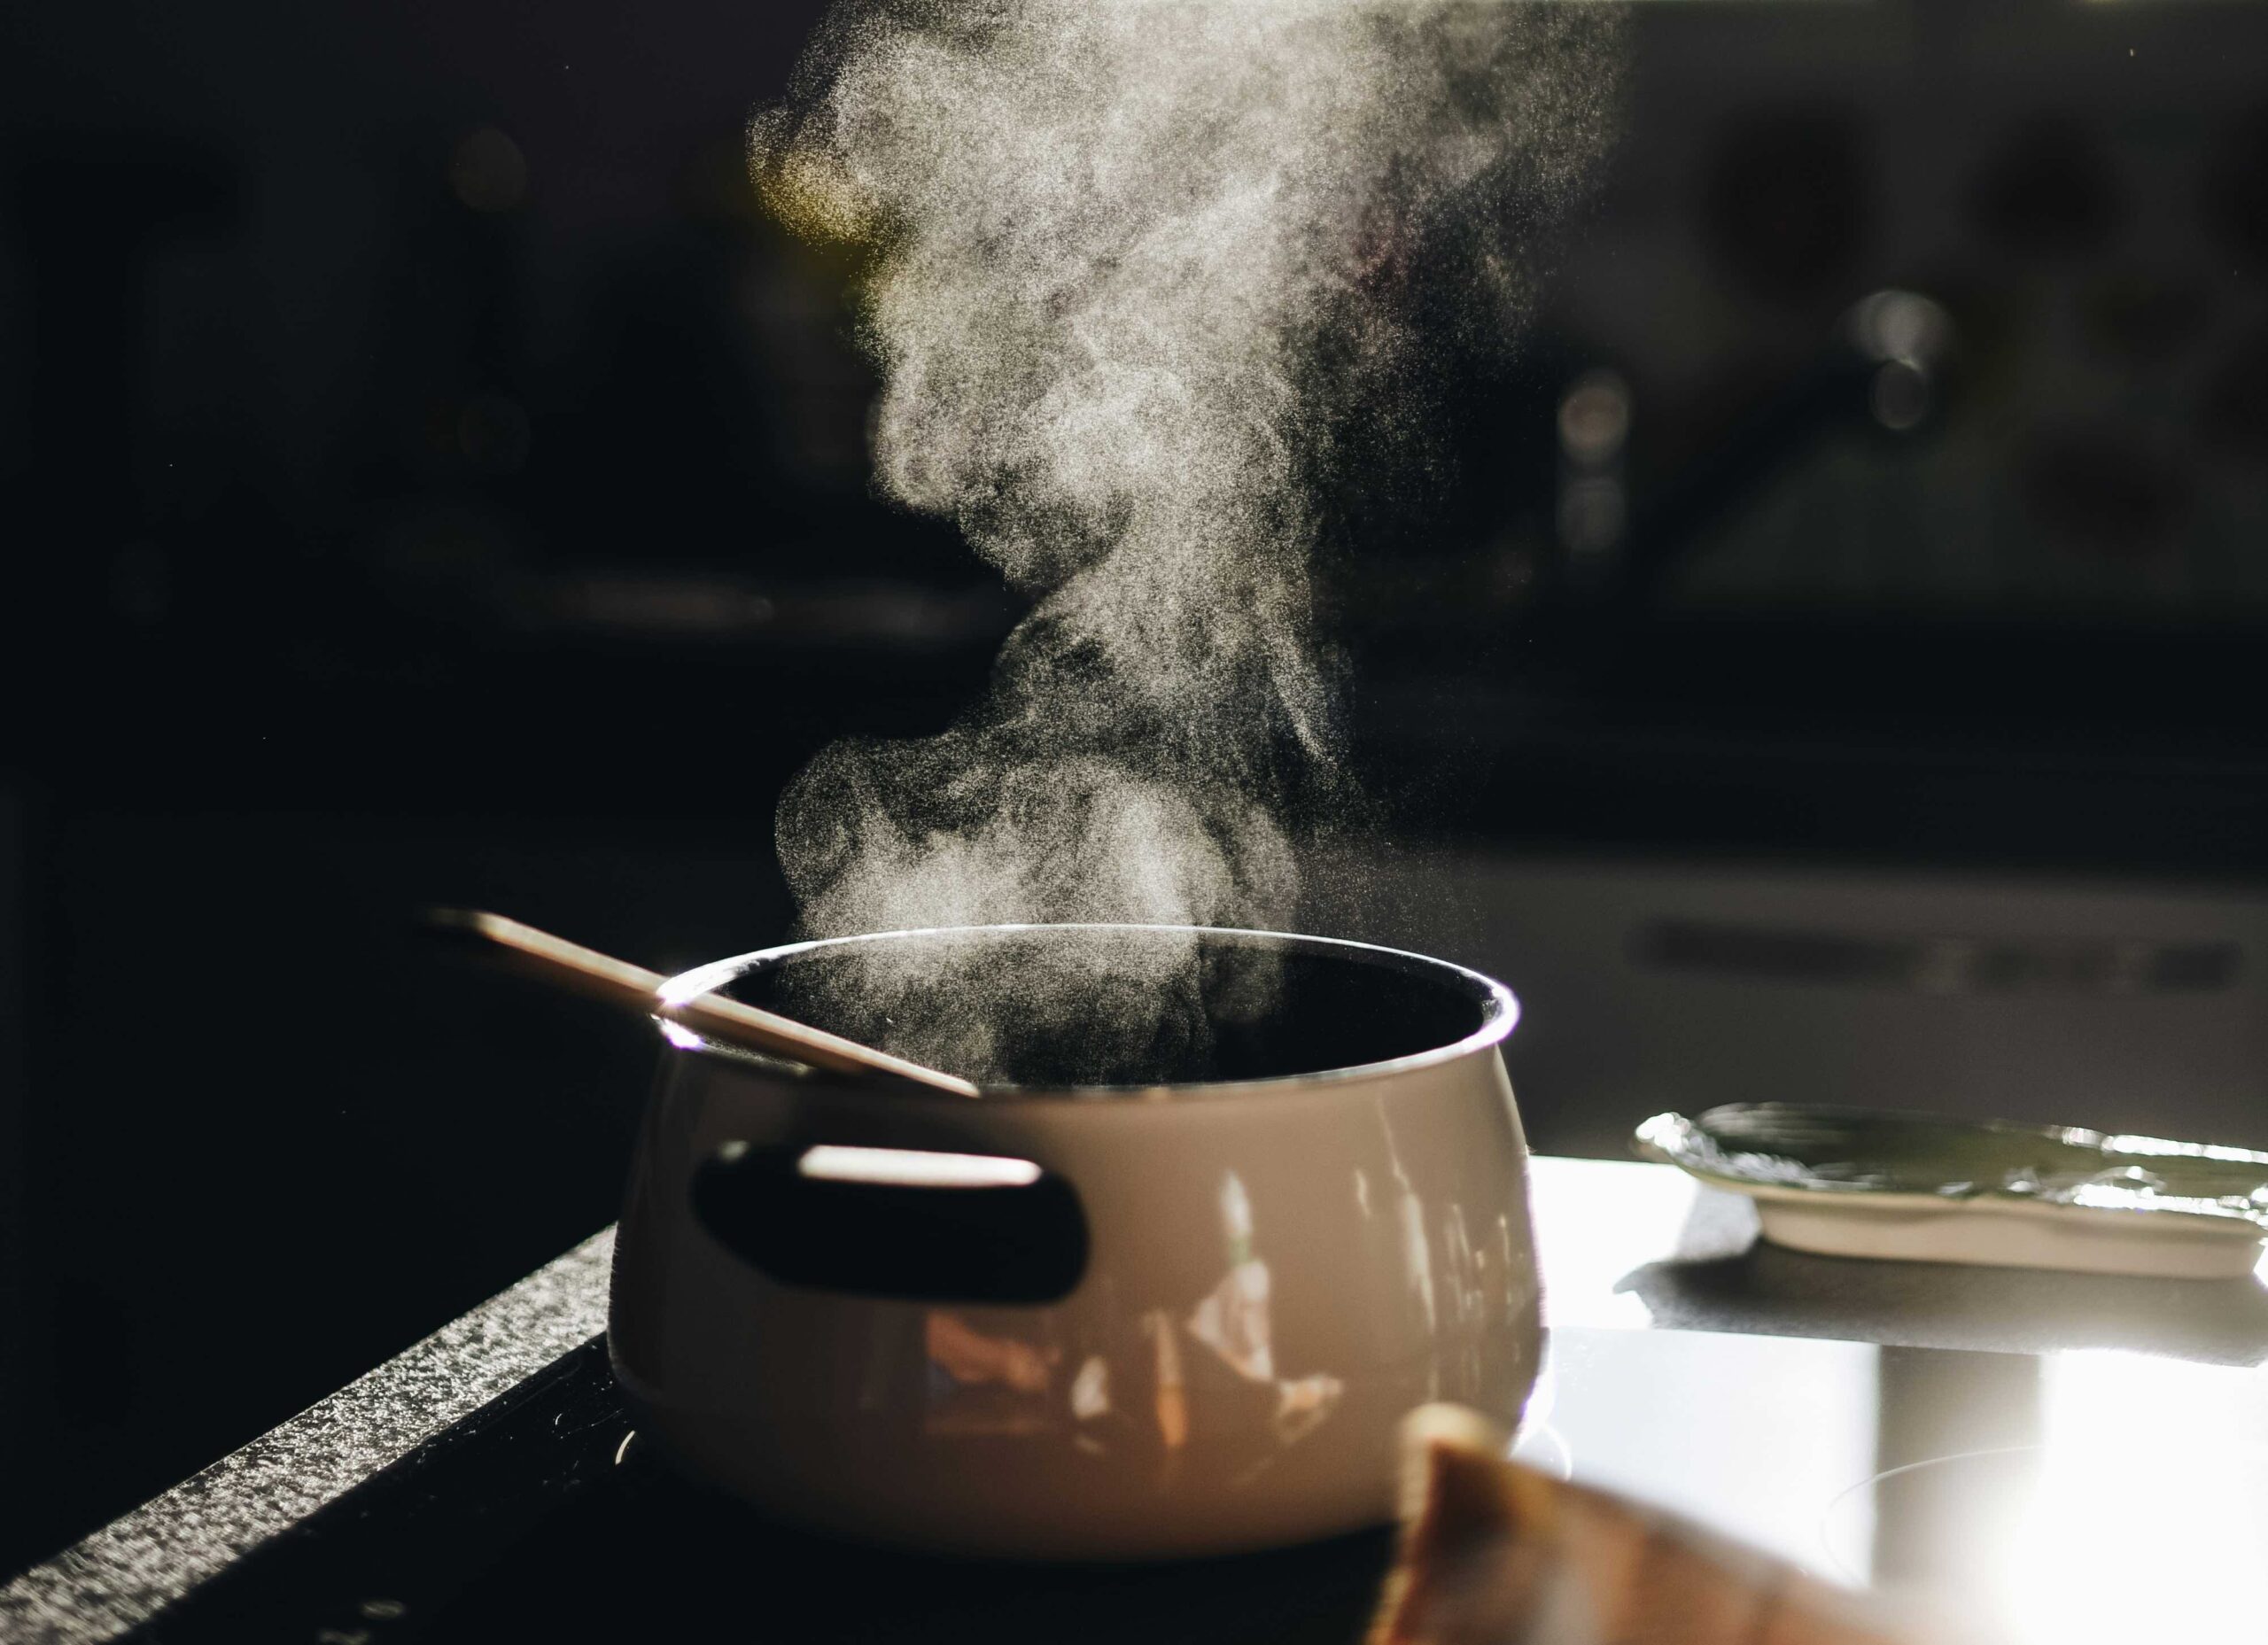 steam rising above a pot of hot soup on the stove